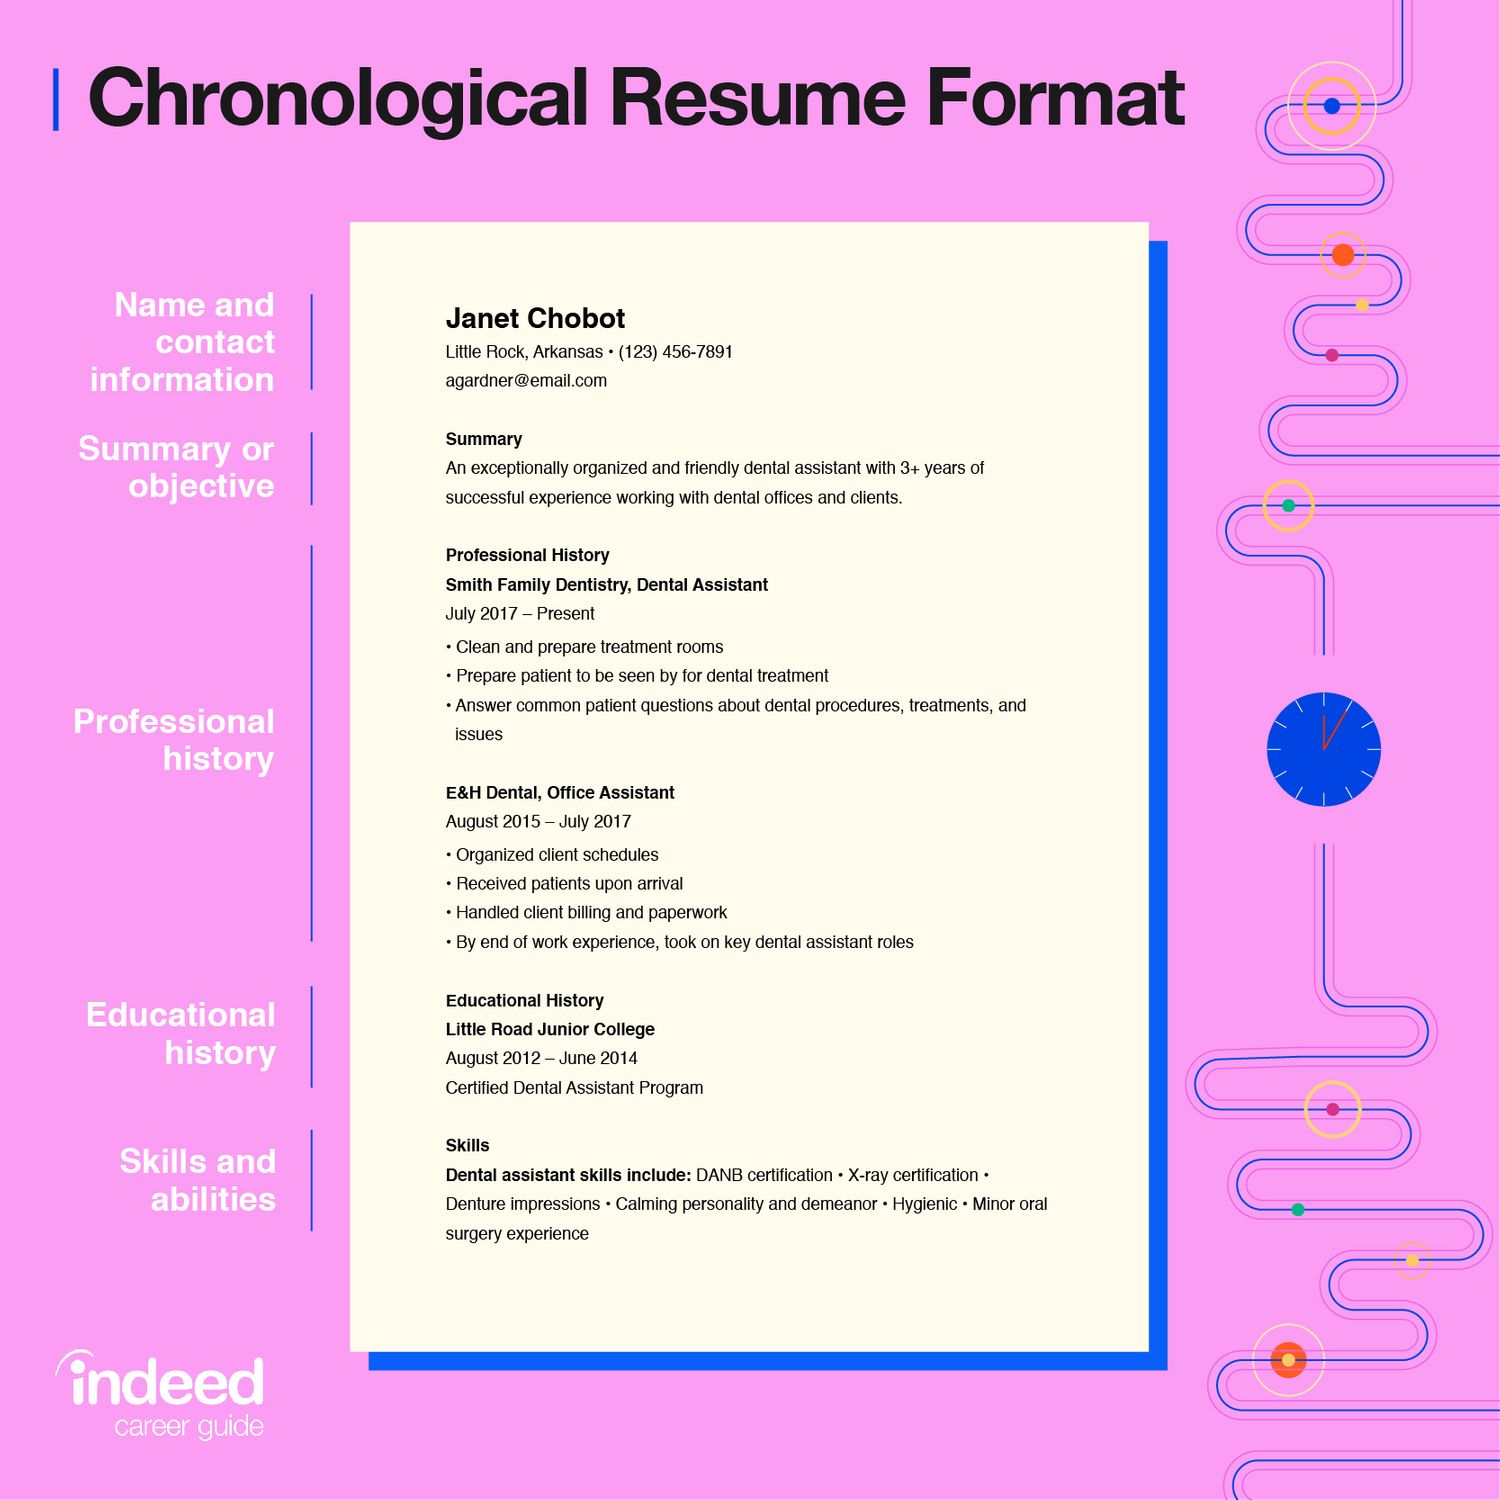 How To Get Fabulous resume On A Tight Budget